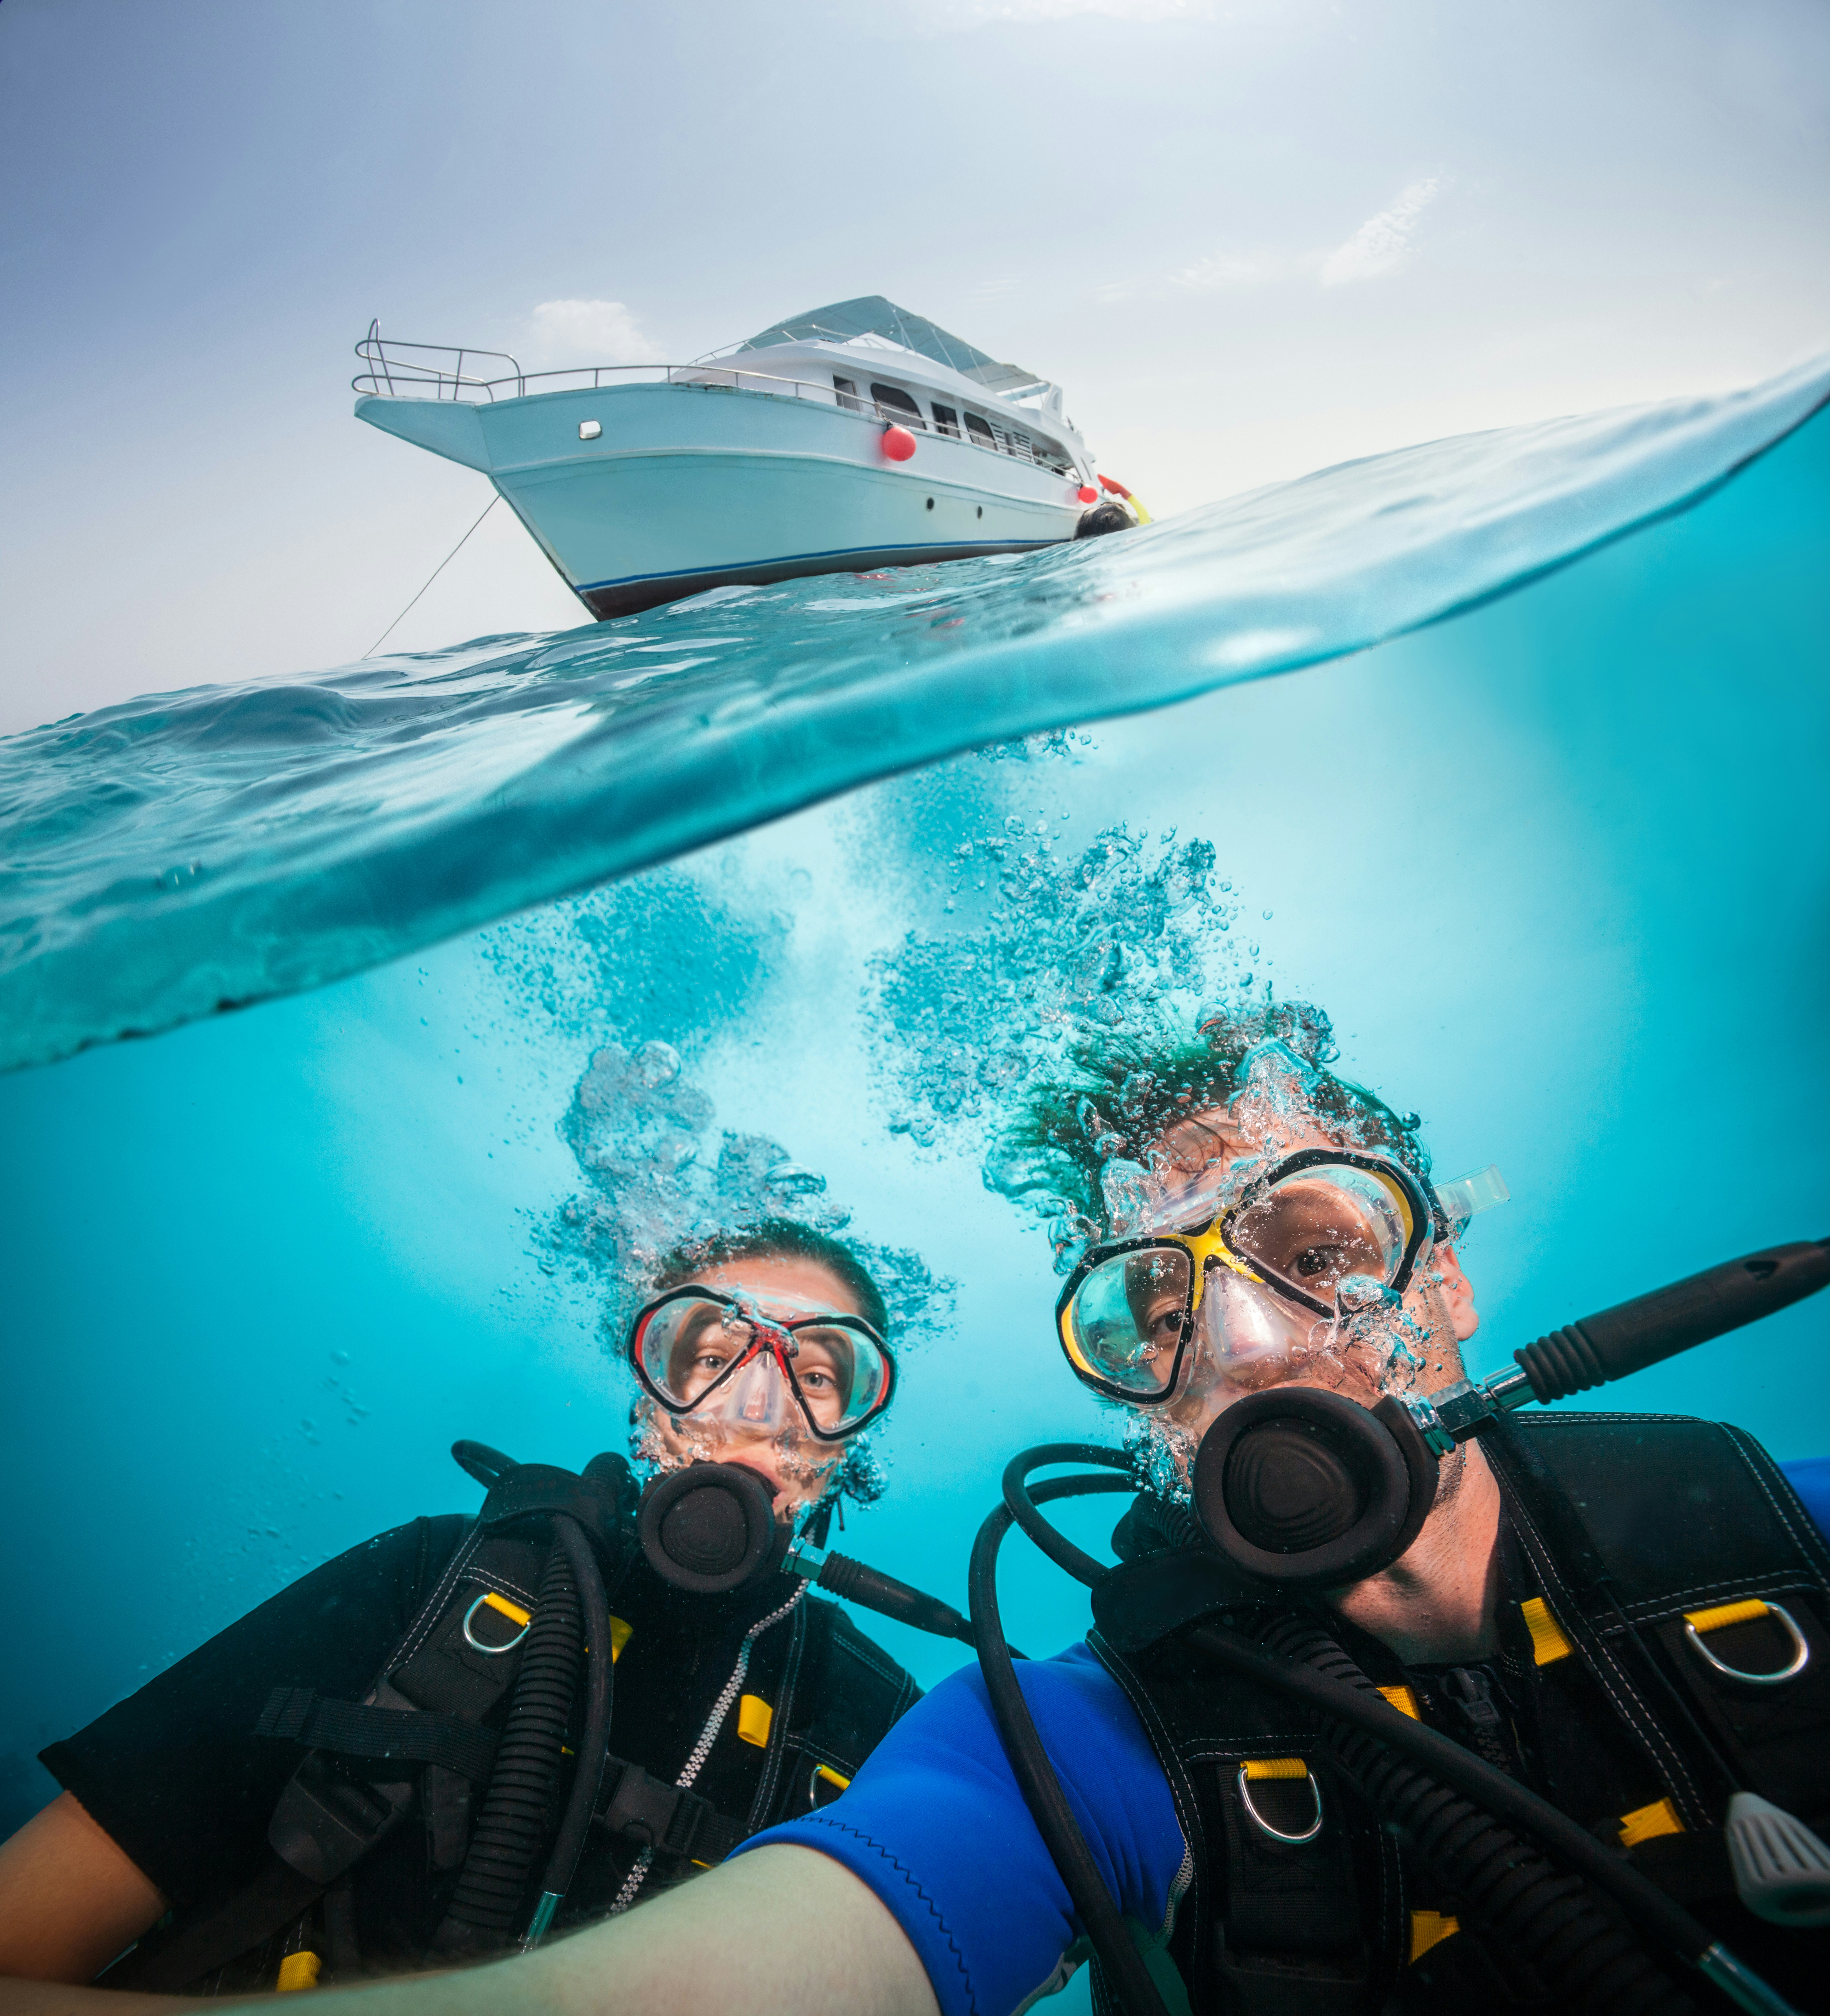 Diving with a partner is a basic rule of recreational diving